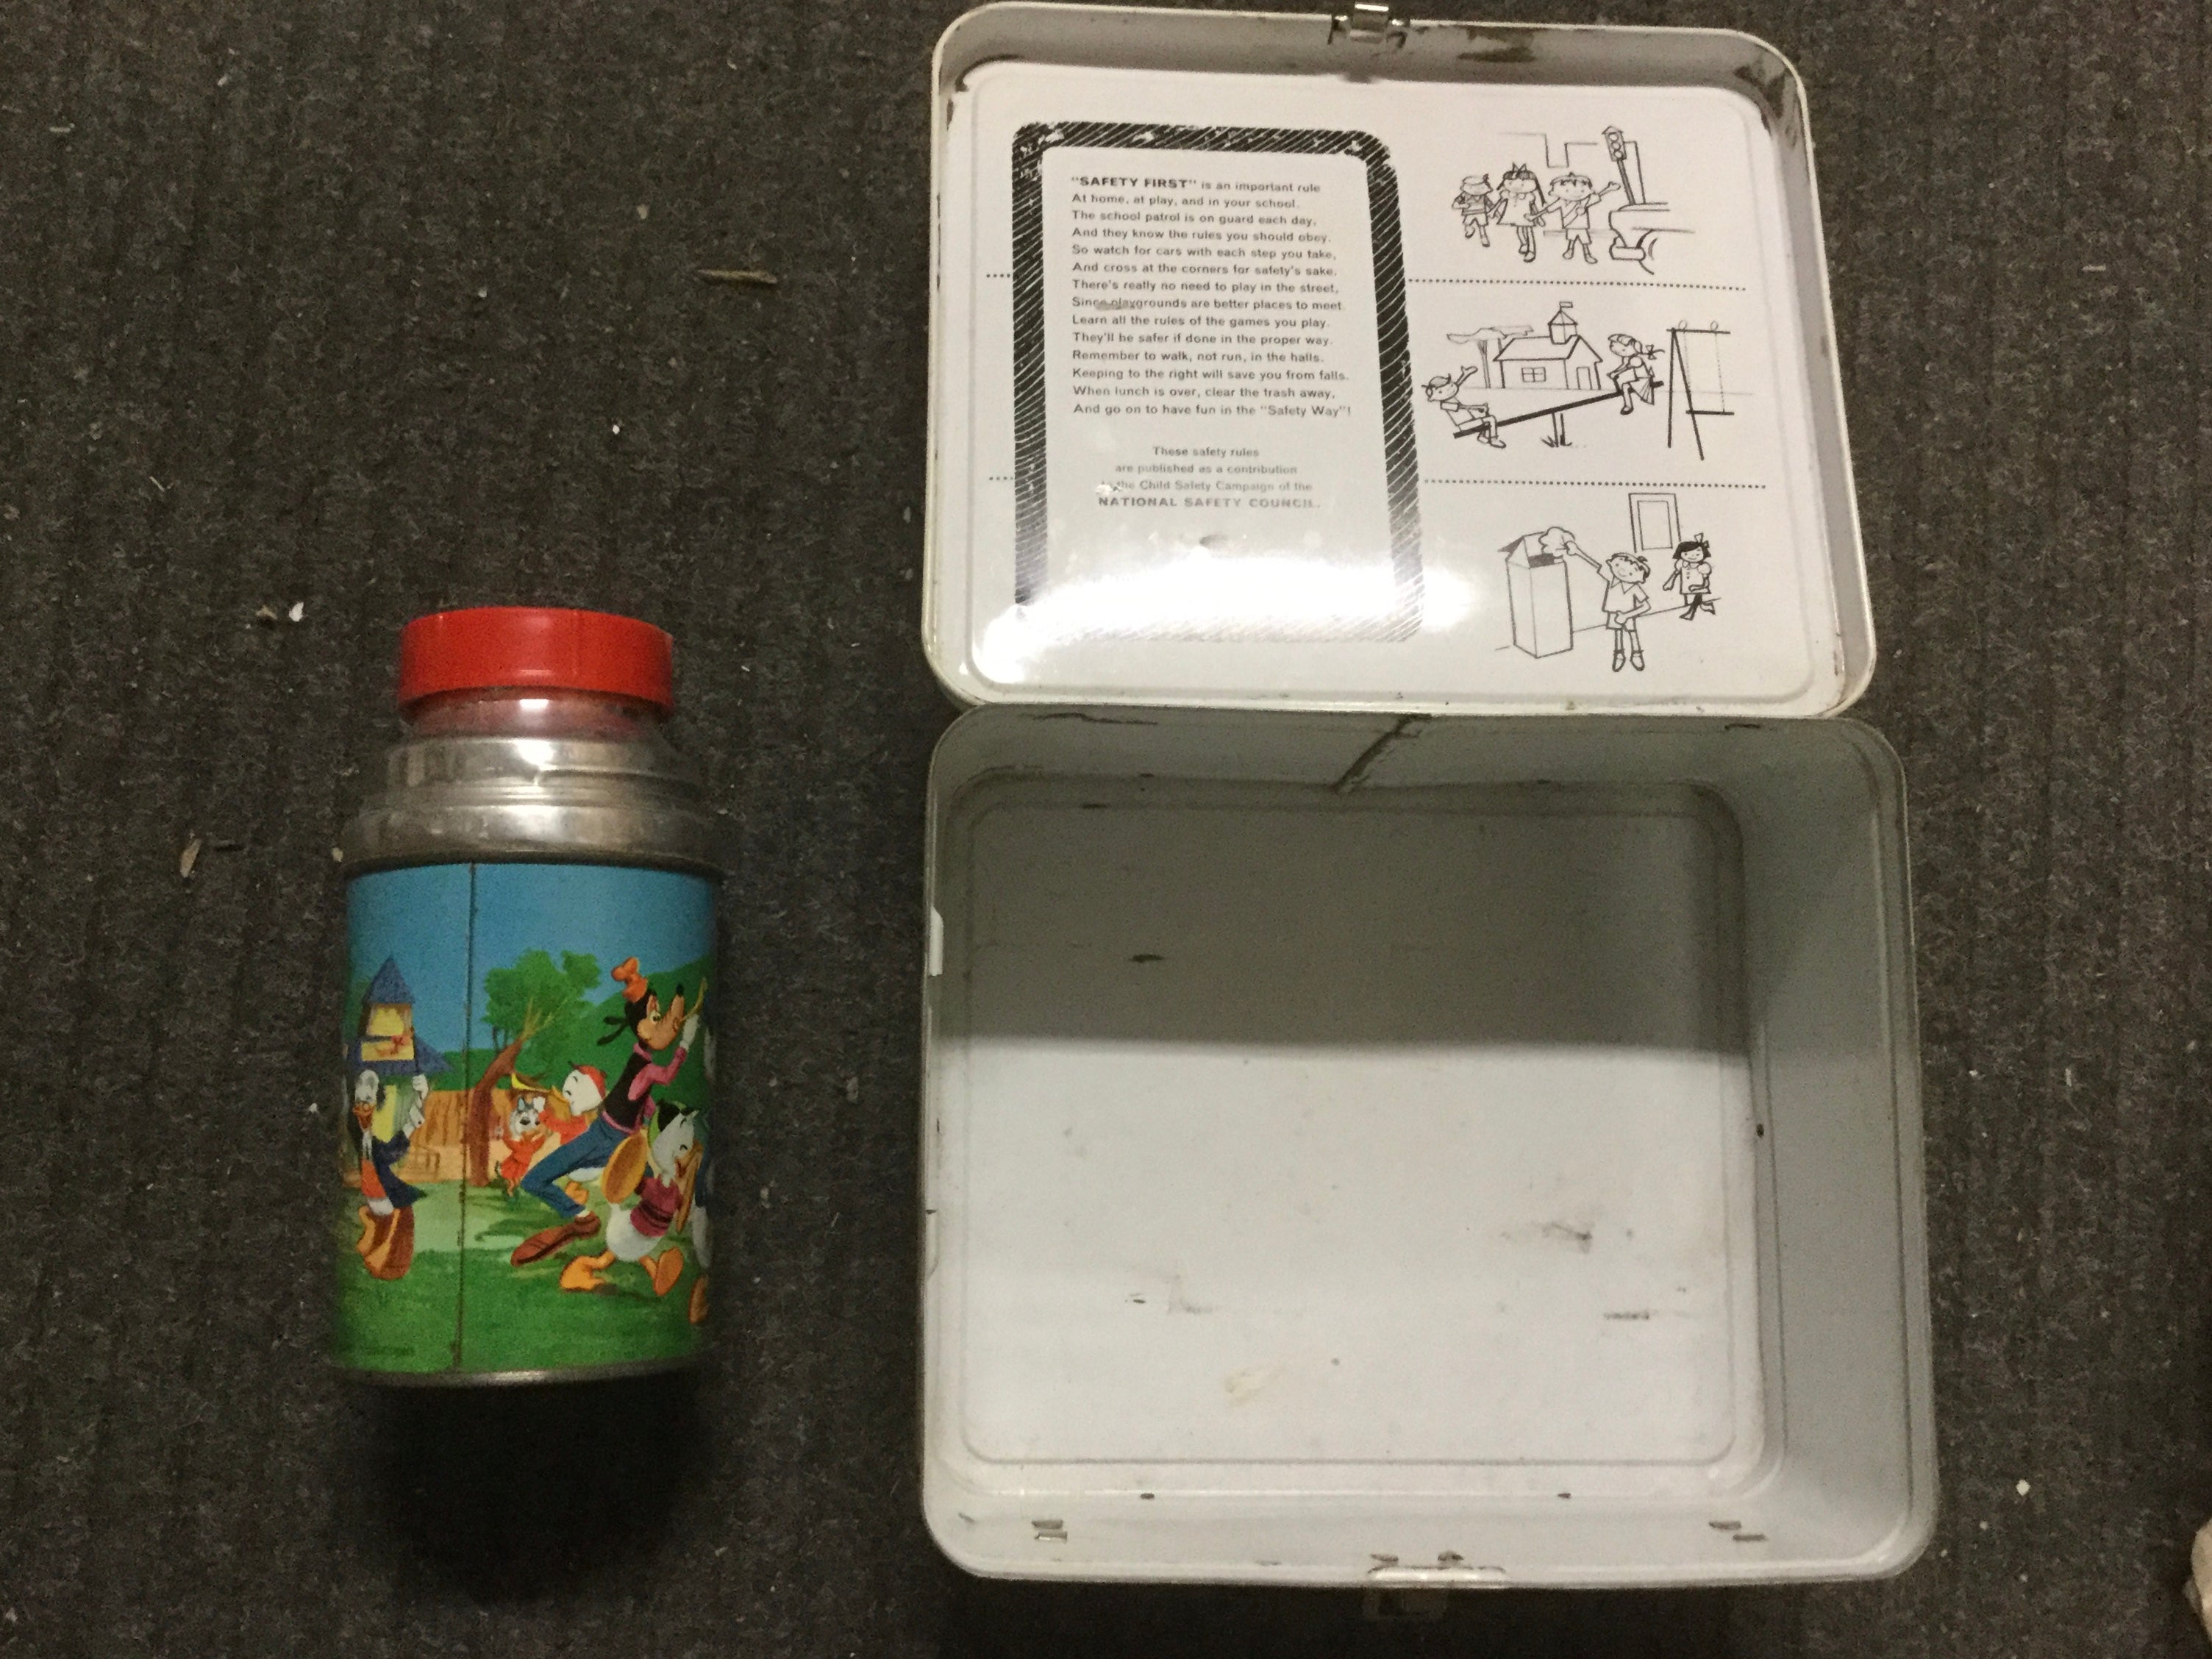 Mickey Mouse Club Rare Disney metal lunch box and metal Thermos 1960s